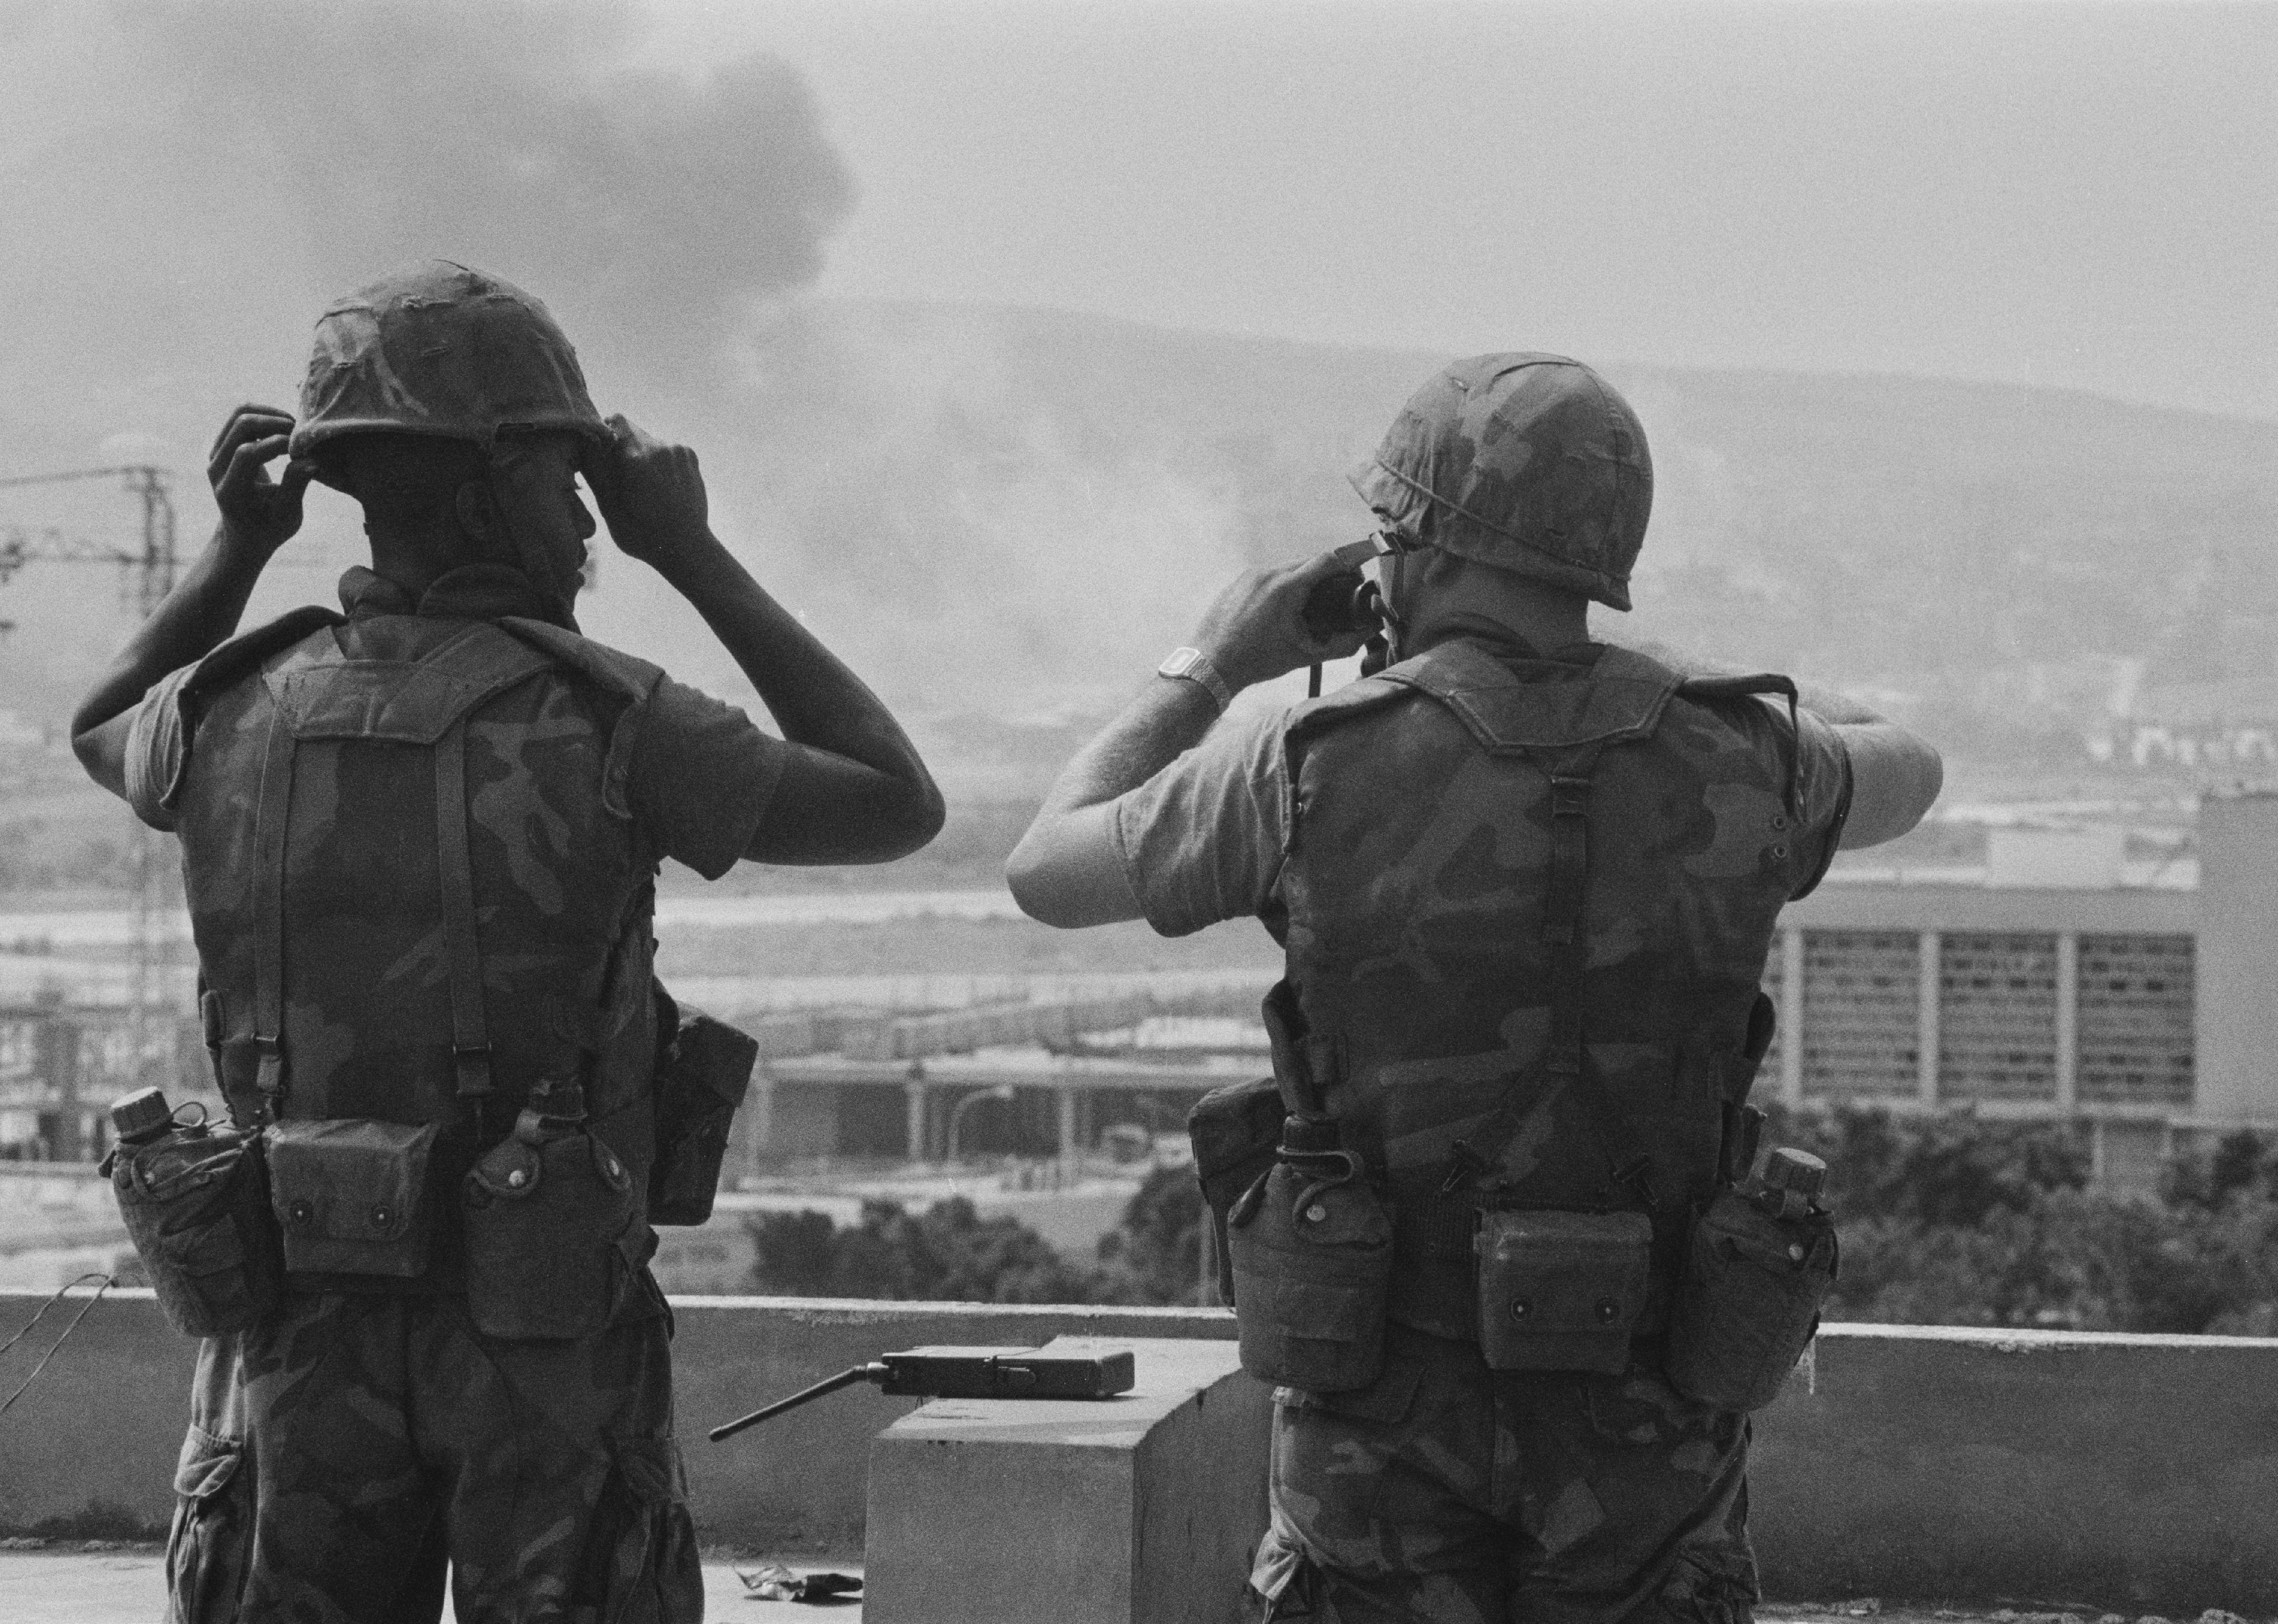 Marines stand guard on top of a building with smoke in the distance.